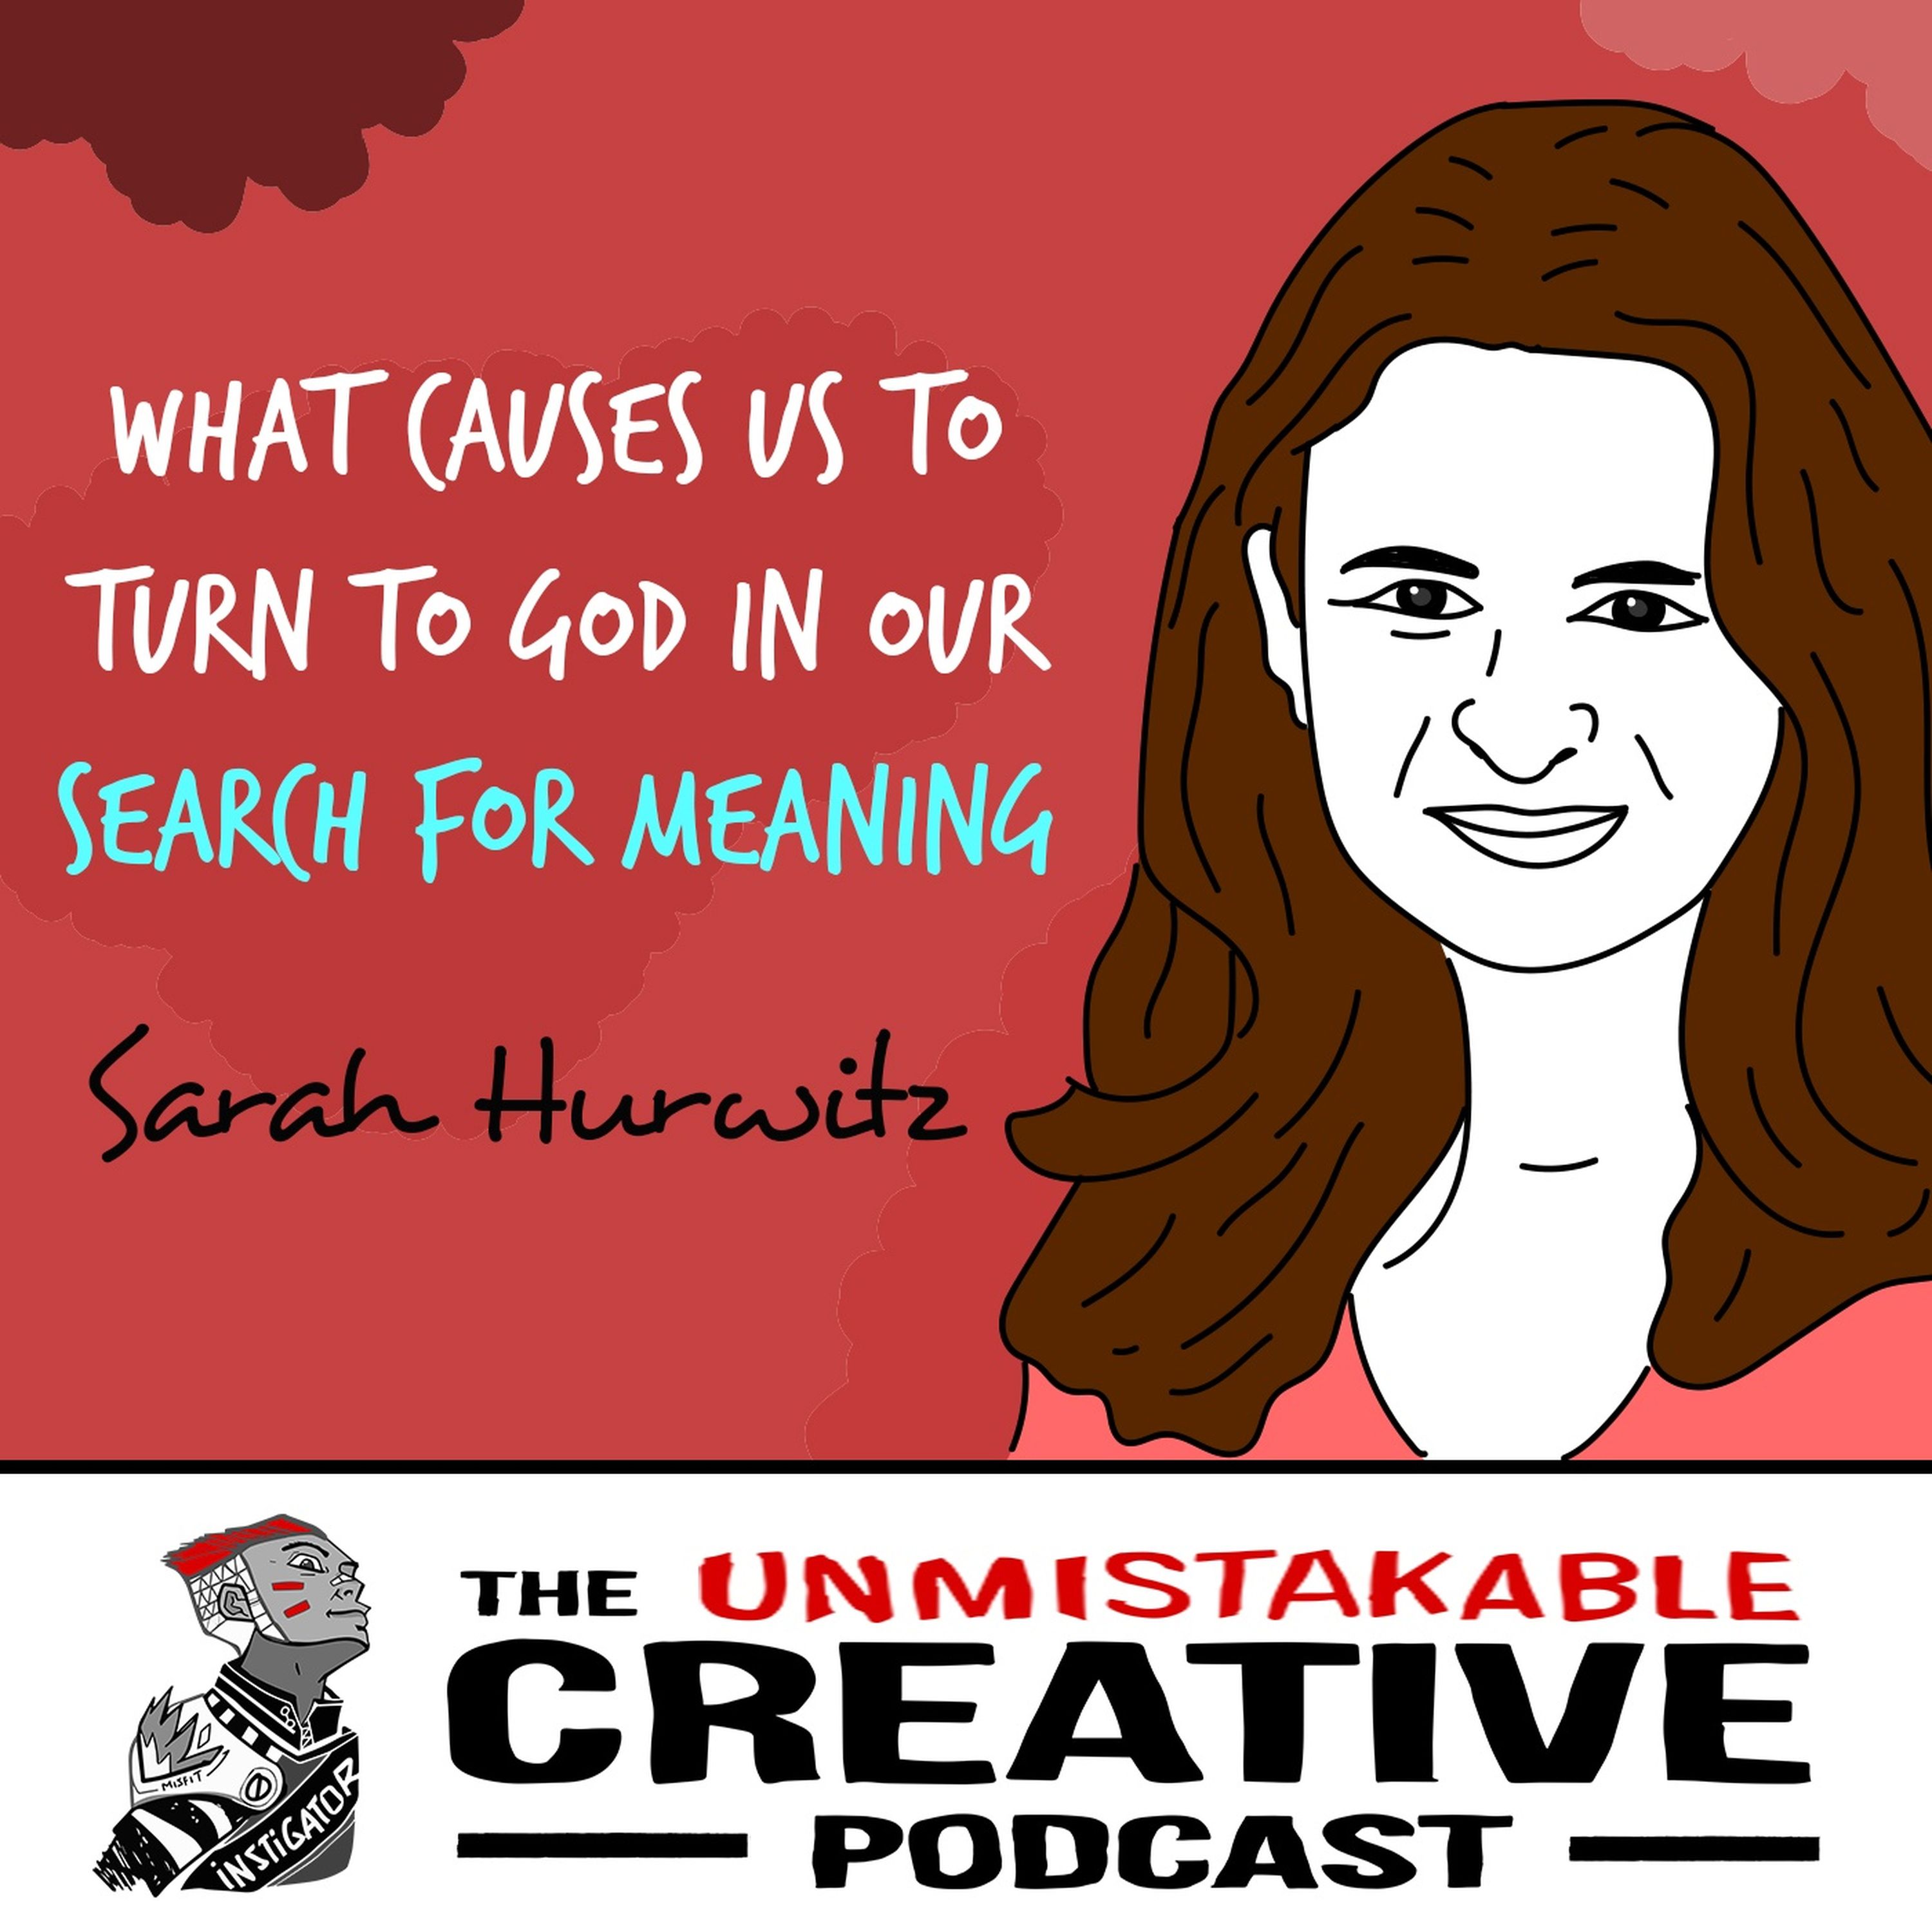 Sarah Hurwitz: What Causes Us to Turn to God in Our Search for Meaning